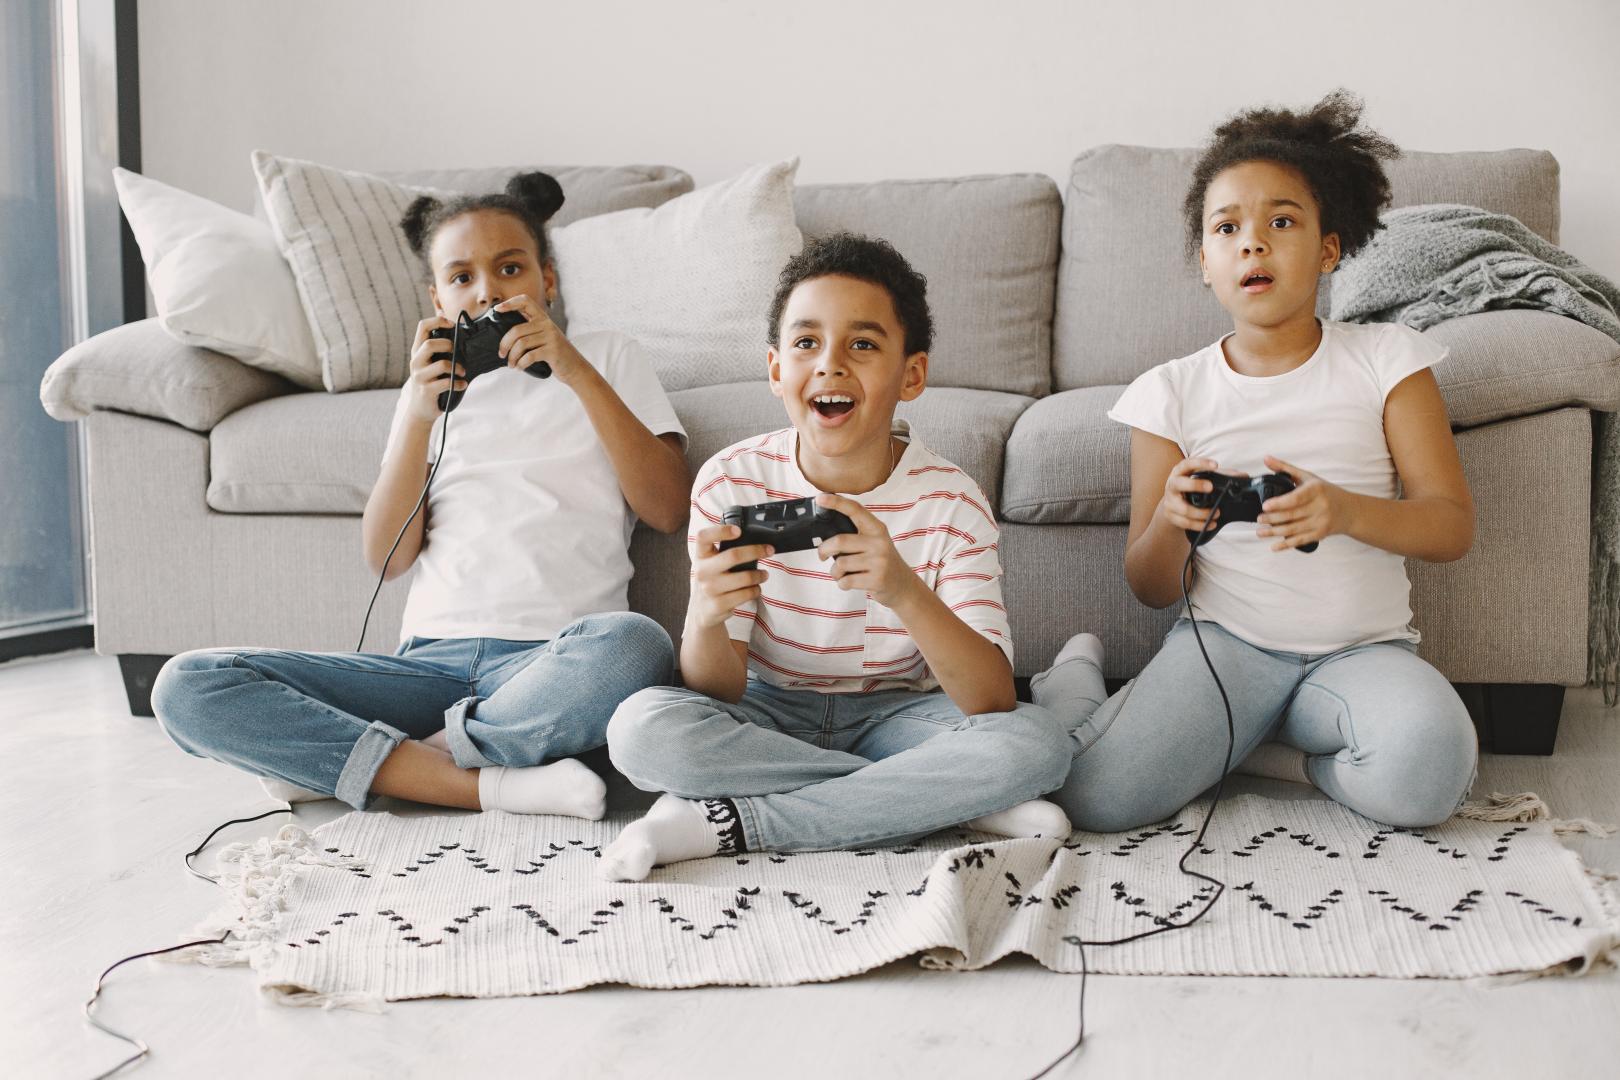 Children play in video games at home on floor